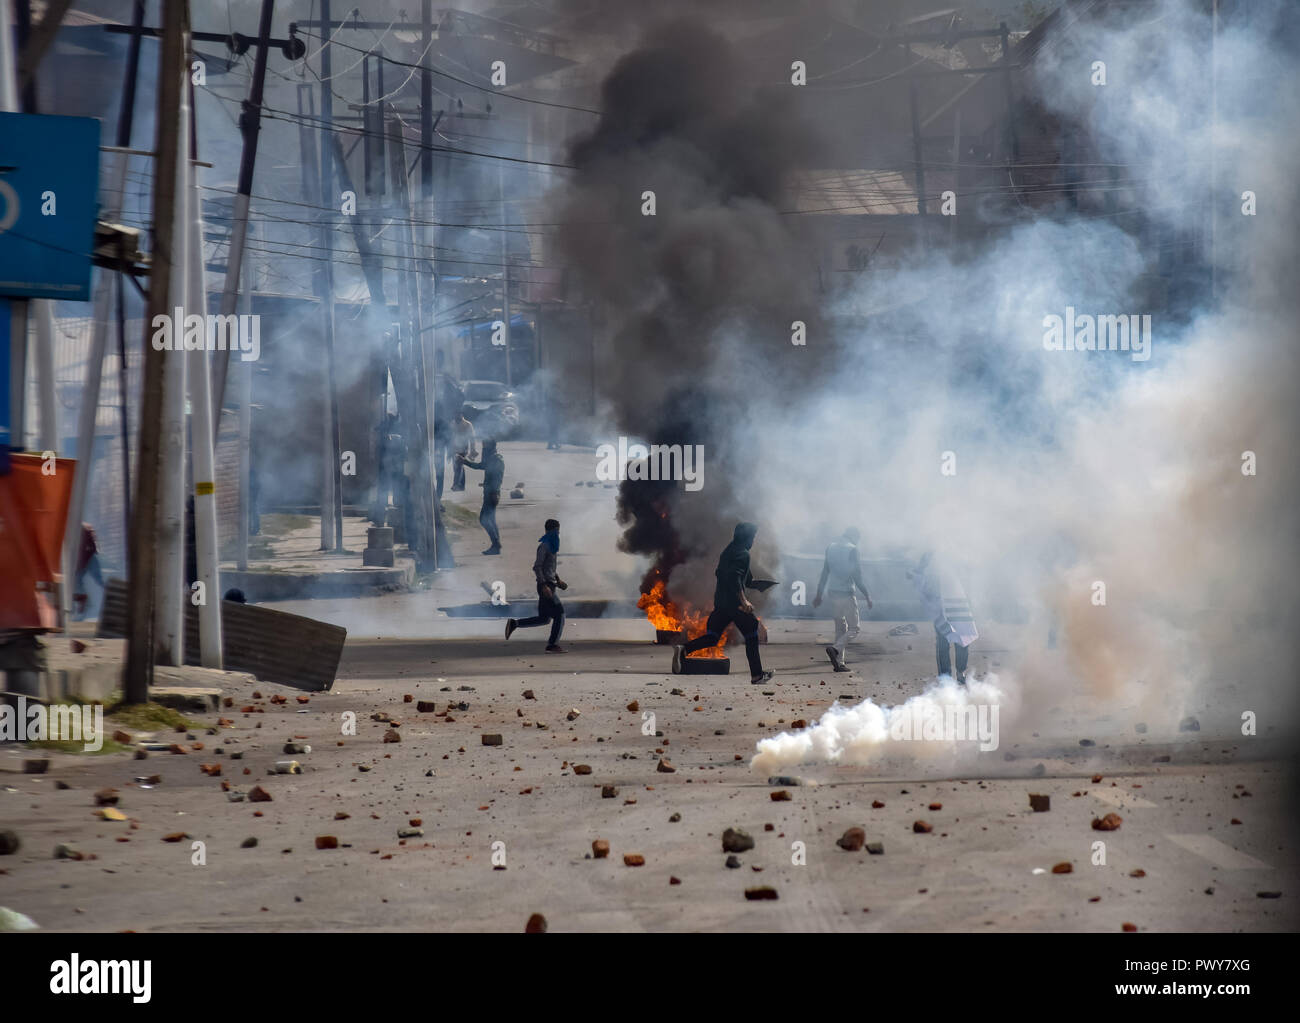 October 17, 2018 - Srinagar, Jammu & Kashmir, India - Kashmiri protesters are seen running for cover as police officers fire pellets and tear smoke cannisters towards them during clashes. Credit: Idrees Abbas/SOPA Images/ZUMA Wire/Alamy Live News Stock Photo